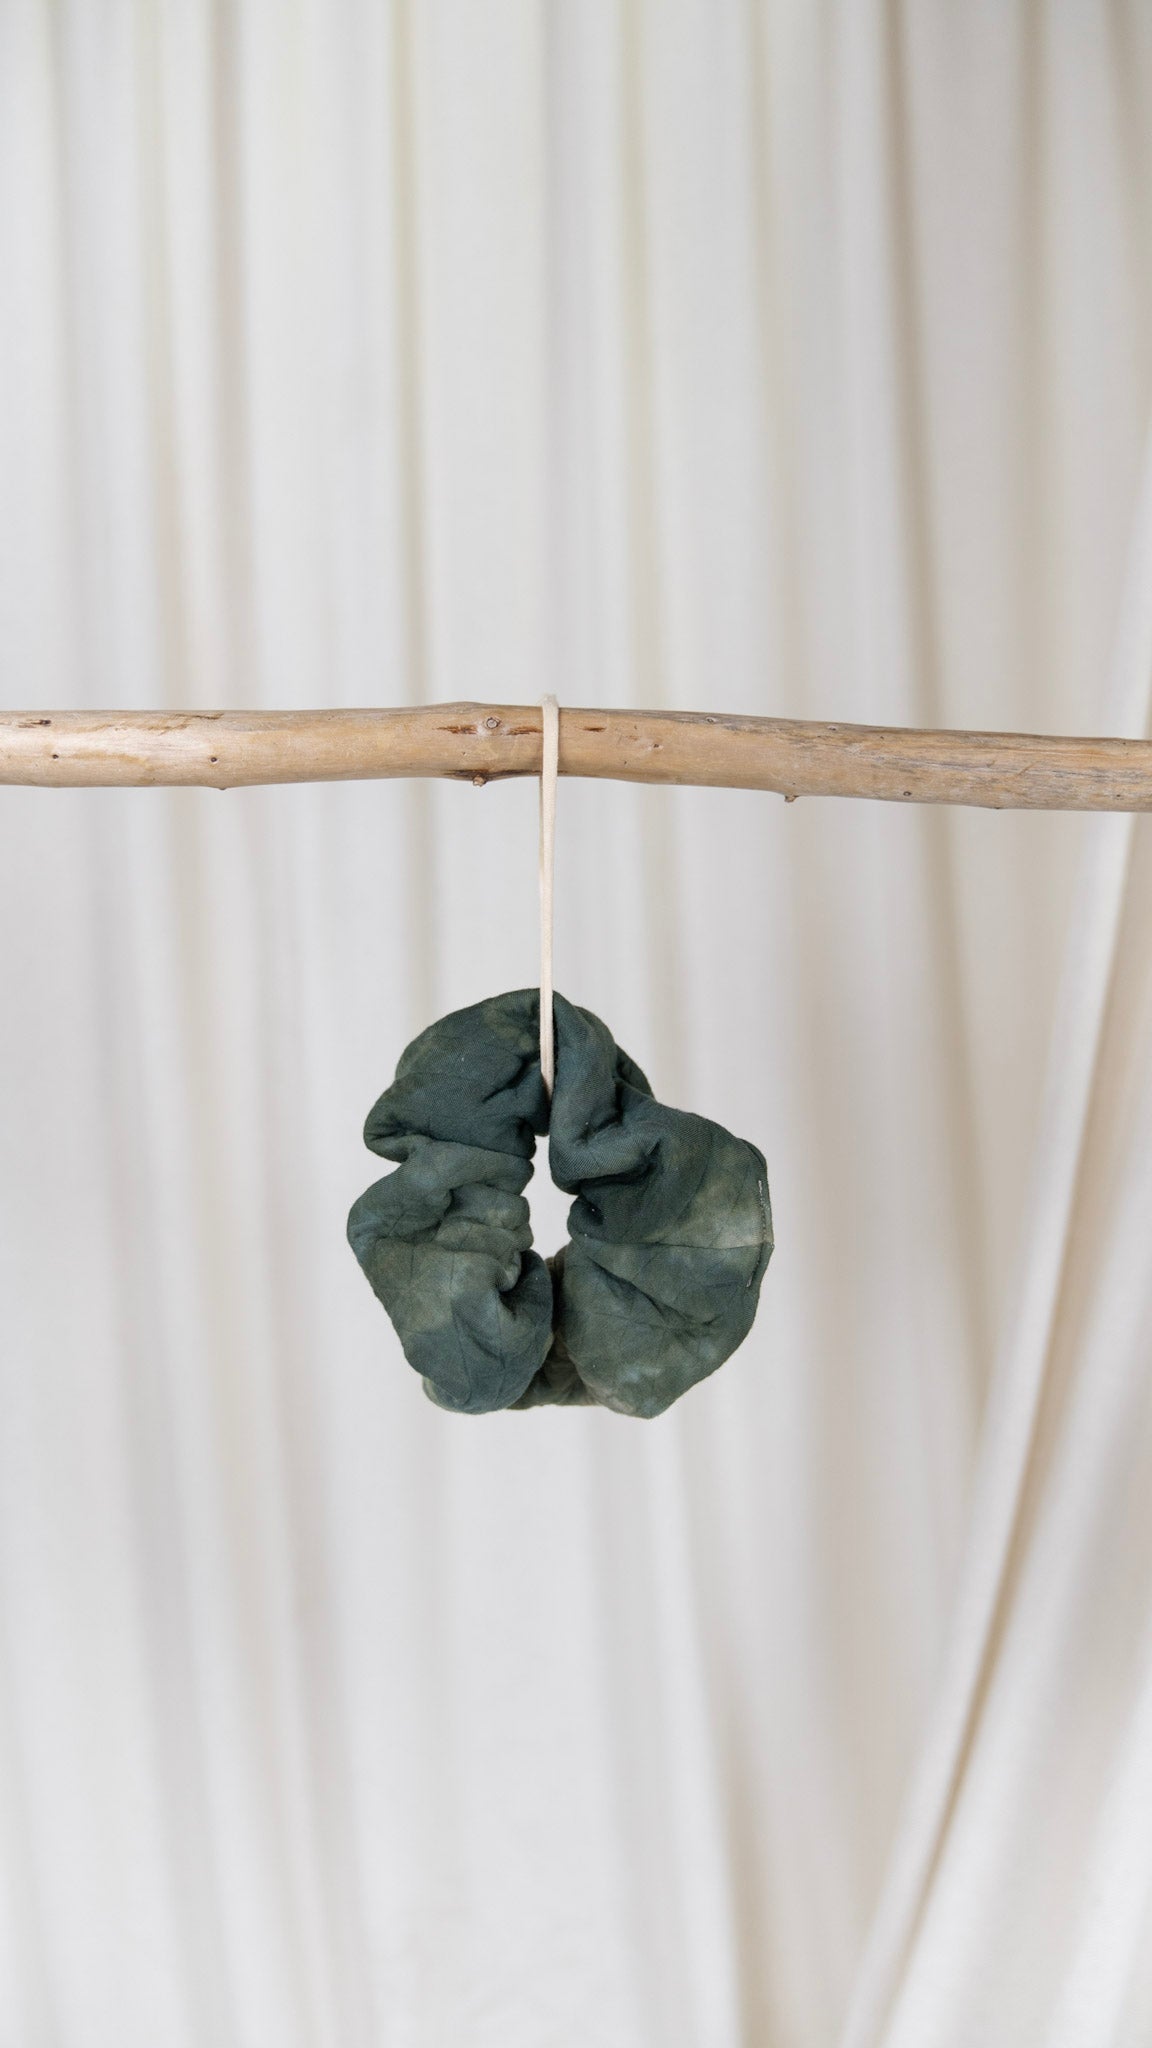 One green dyed oversized diamond quilted scrunchie hanging from a piece of driftwood